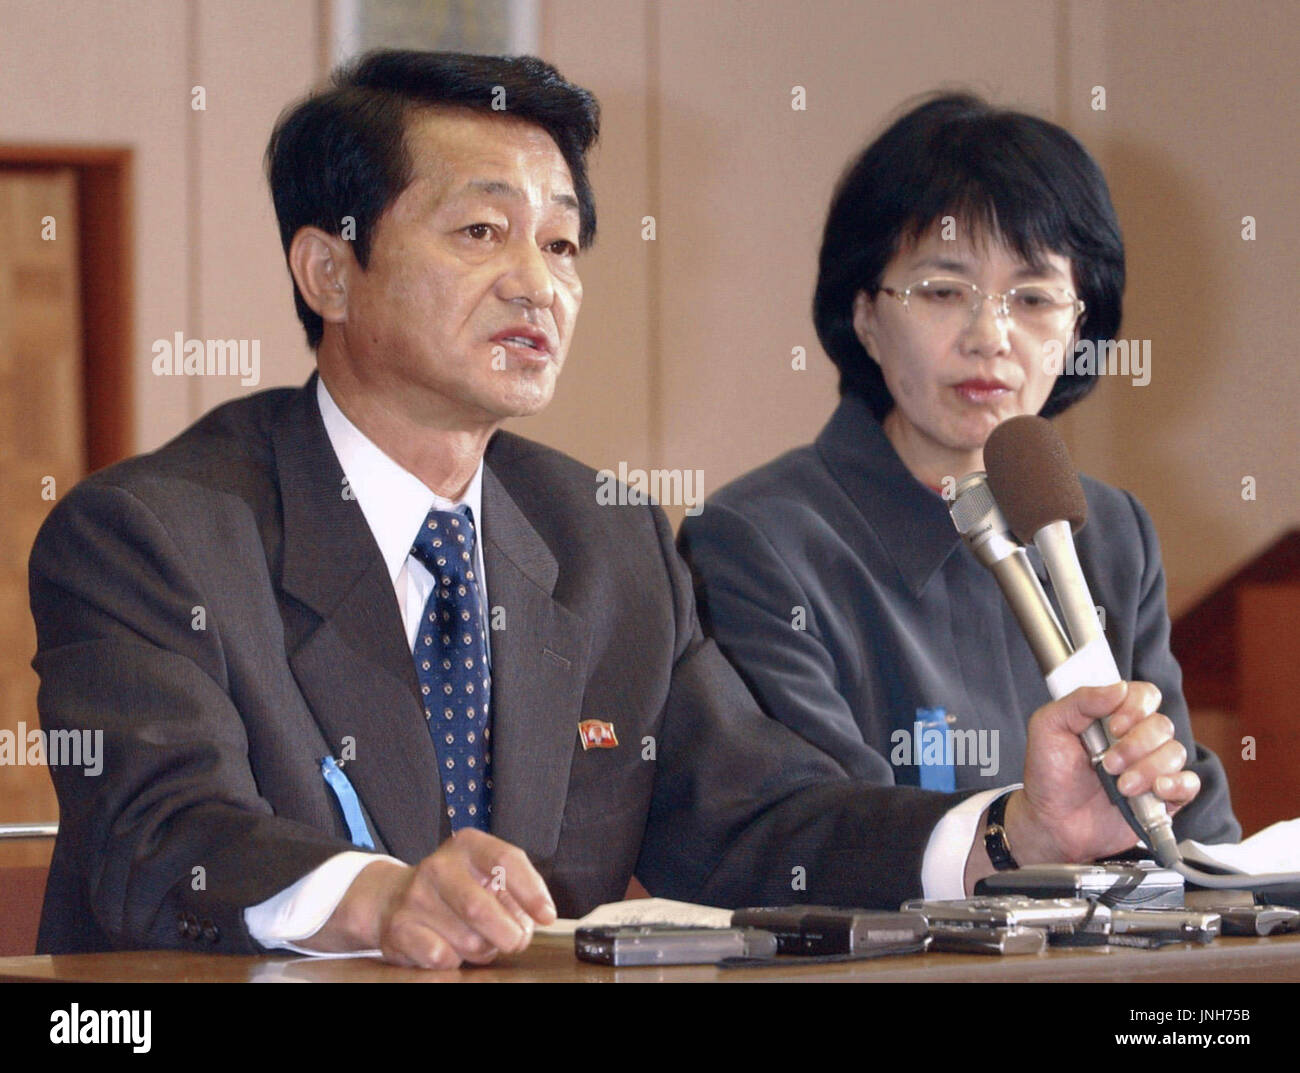 OBAMA, Japan - Yasushi Chimura (L) and his wife Fukie, a couple abducted by North Korea in 1978, meet the press at the Obama municipal office in Fukui Prefecture on Nov. 14. They talked about their one-month stay in Japan since returning to their homeland on Oct. 15 from the North. (Kyodo) Stock Photo